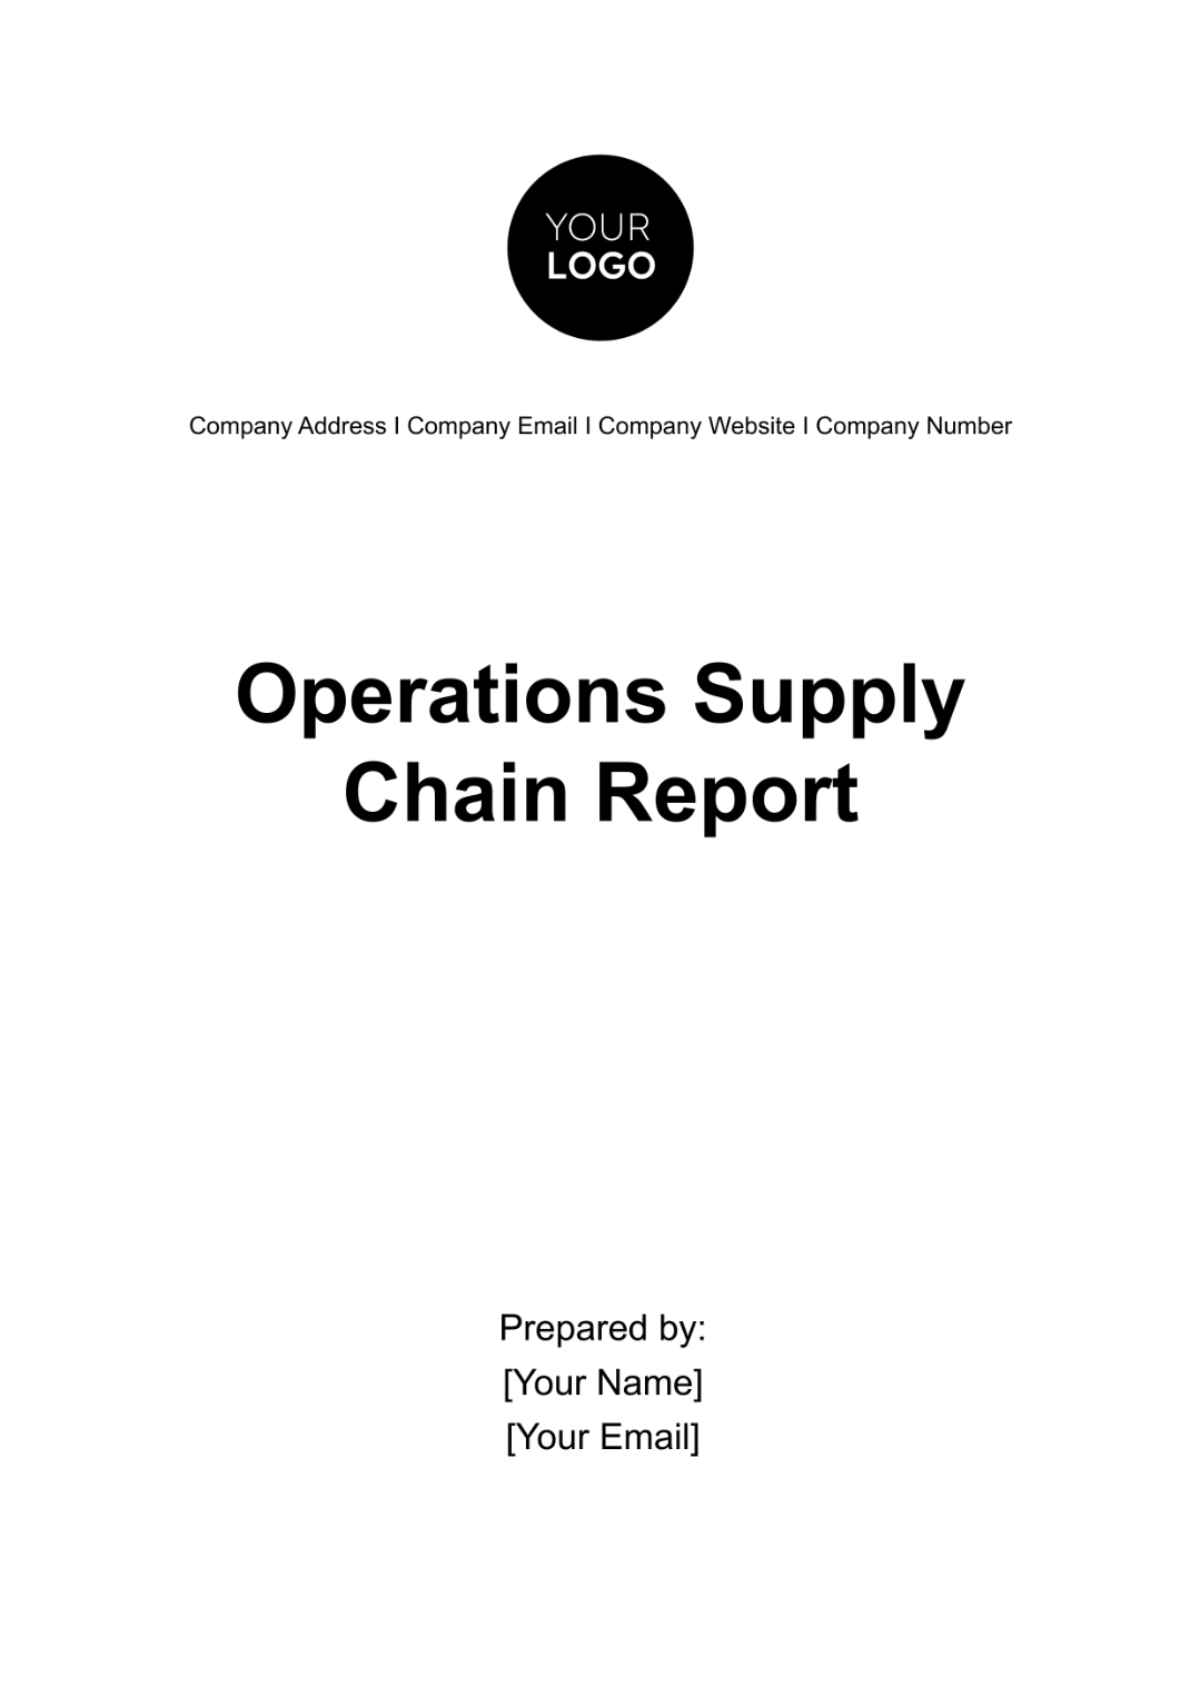 Operations Supply Chain Report Template